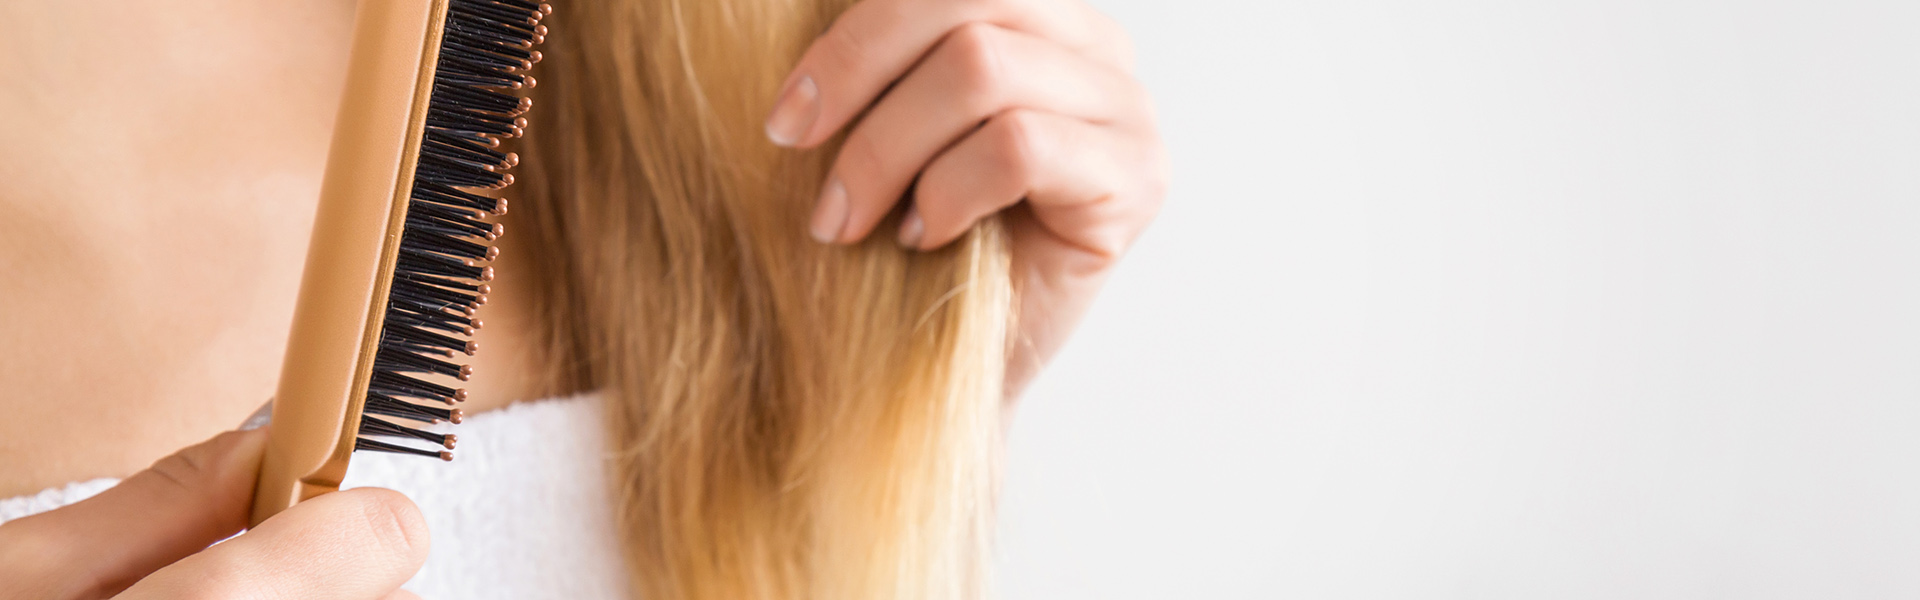 Split ends – Overview about damaged hair